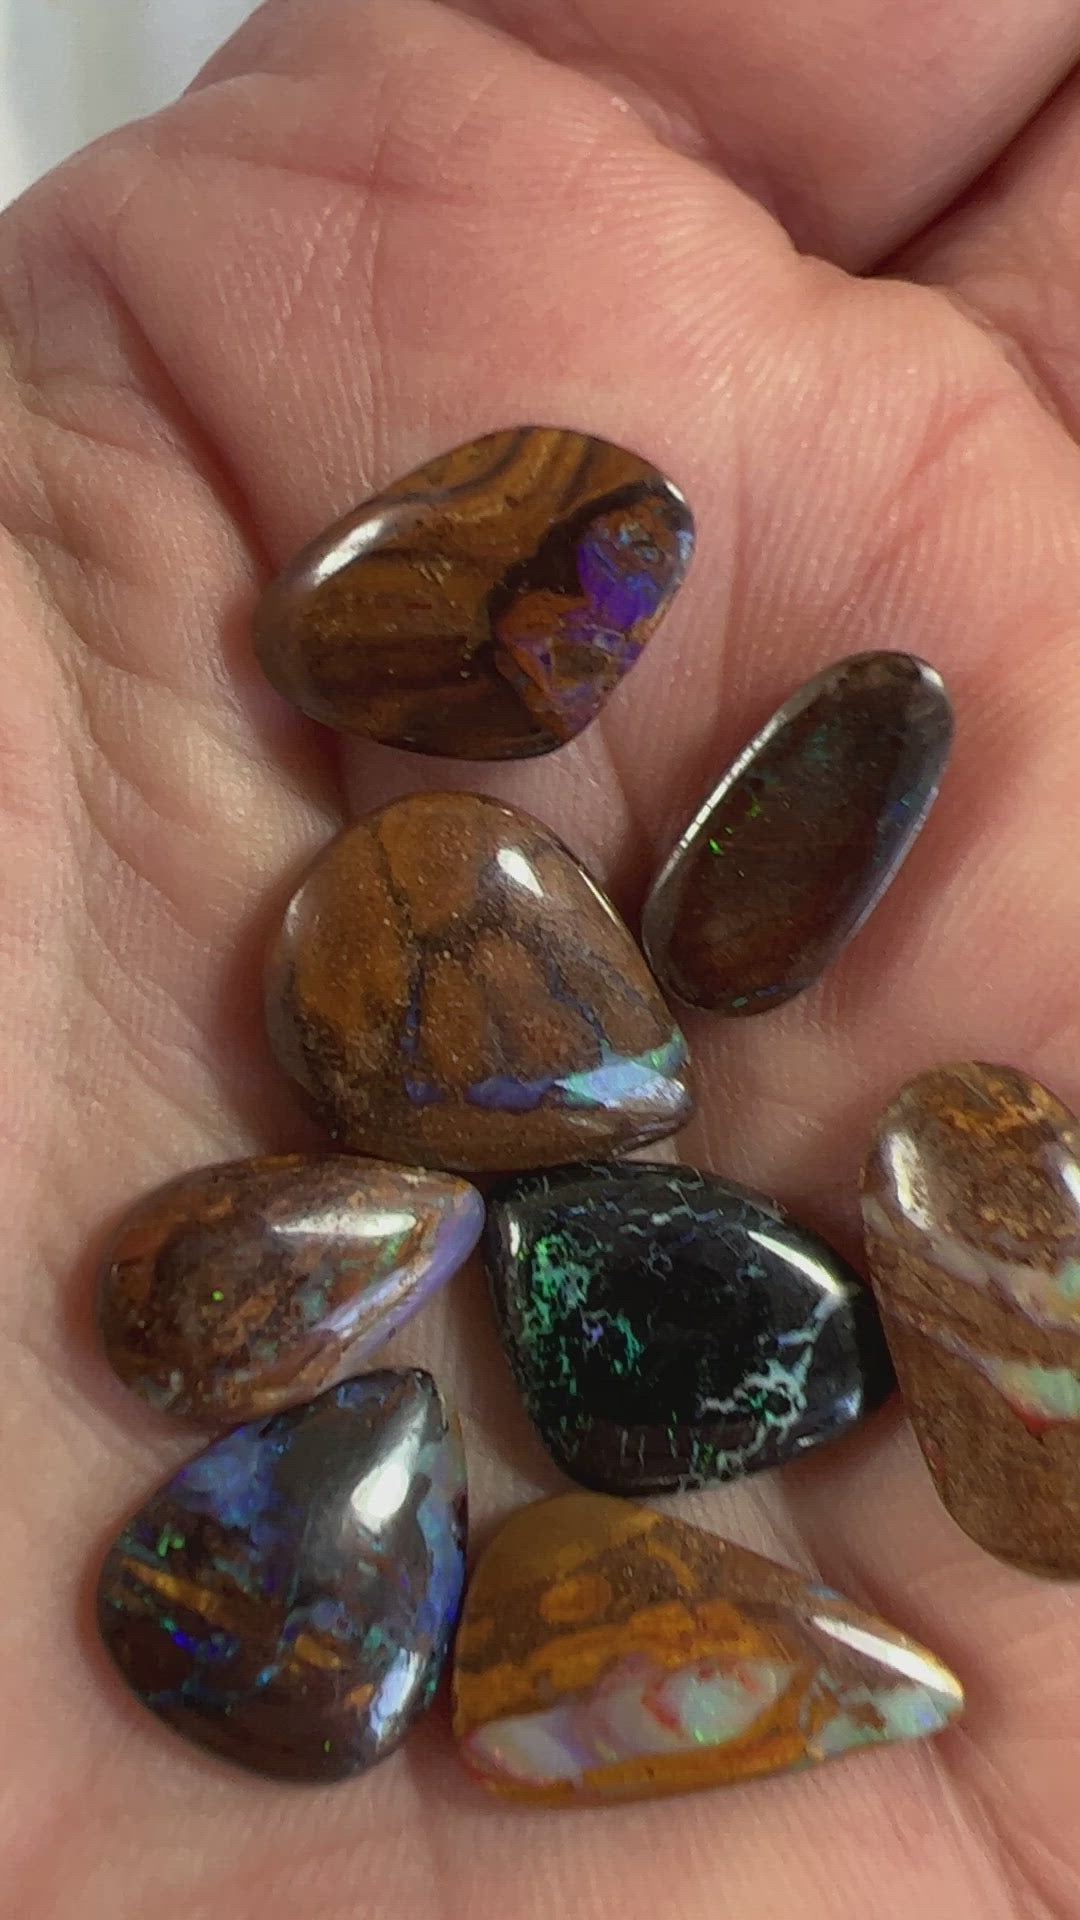 8 lovely boulder opals from Winton. Nice polish and colours.